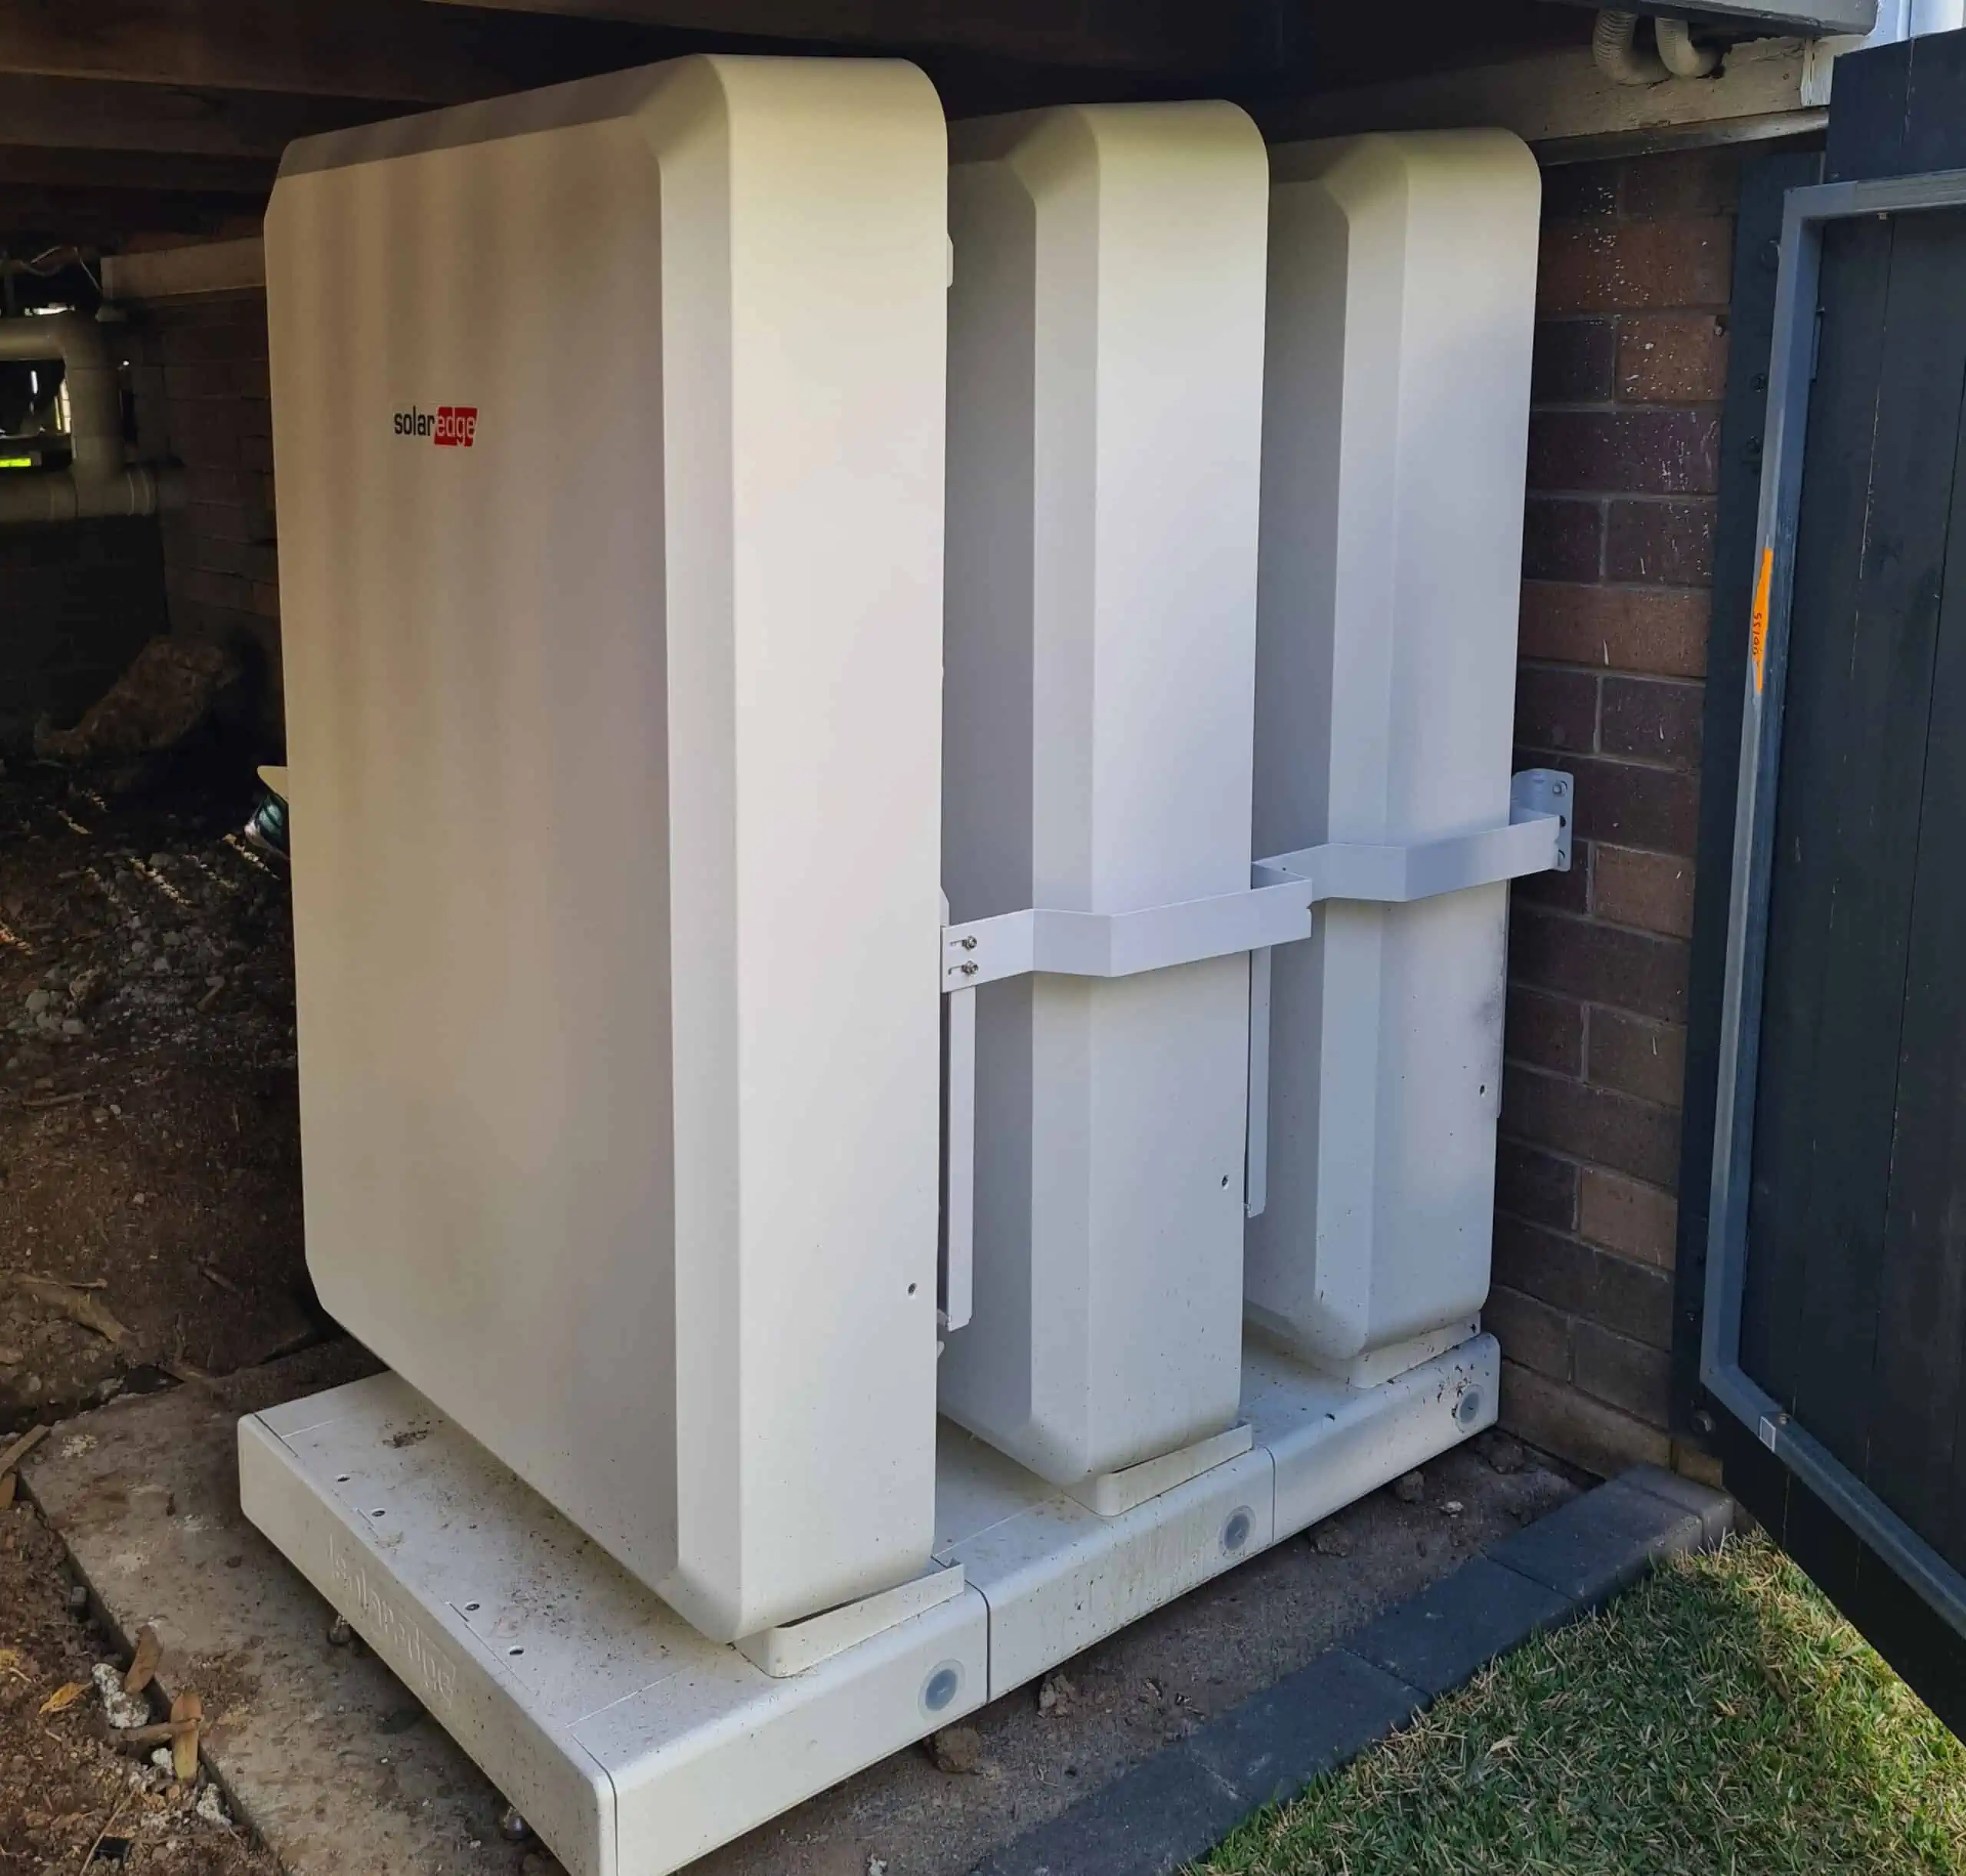 Compare the SolarEdge Energy Bank Battery to the Tesla Powerwall